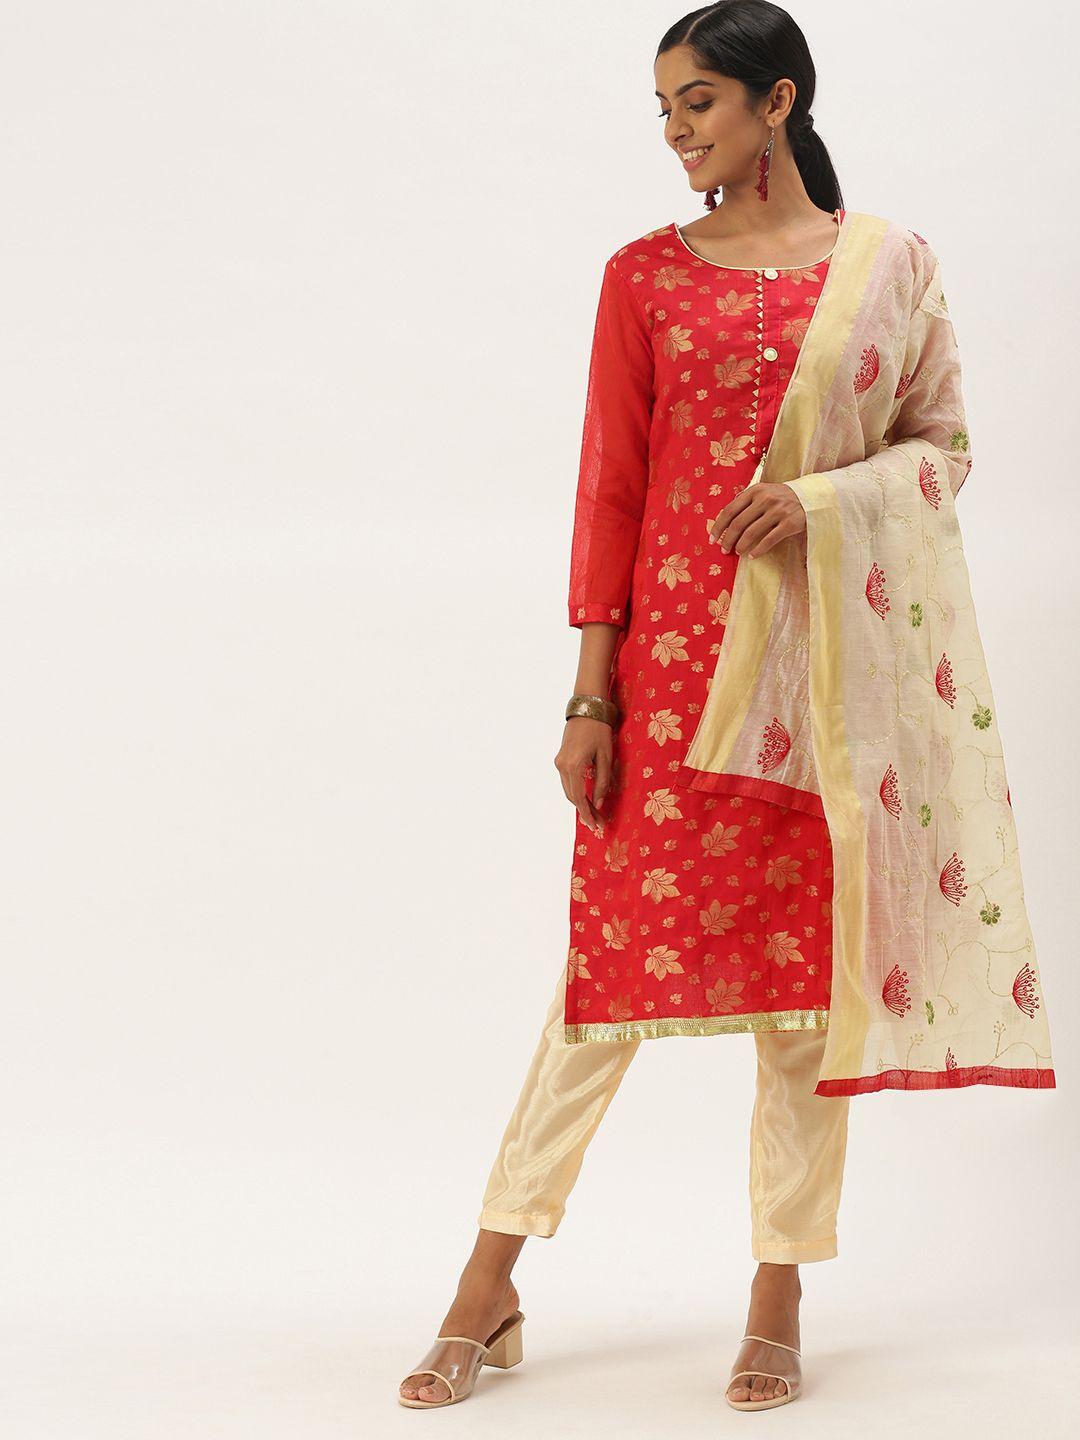 ladusaa red & gold-toned unstitched dress material